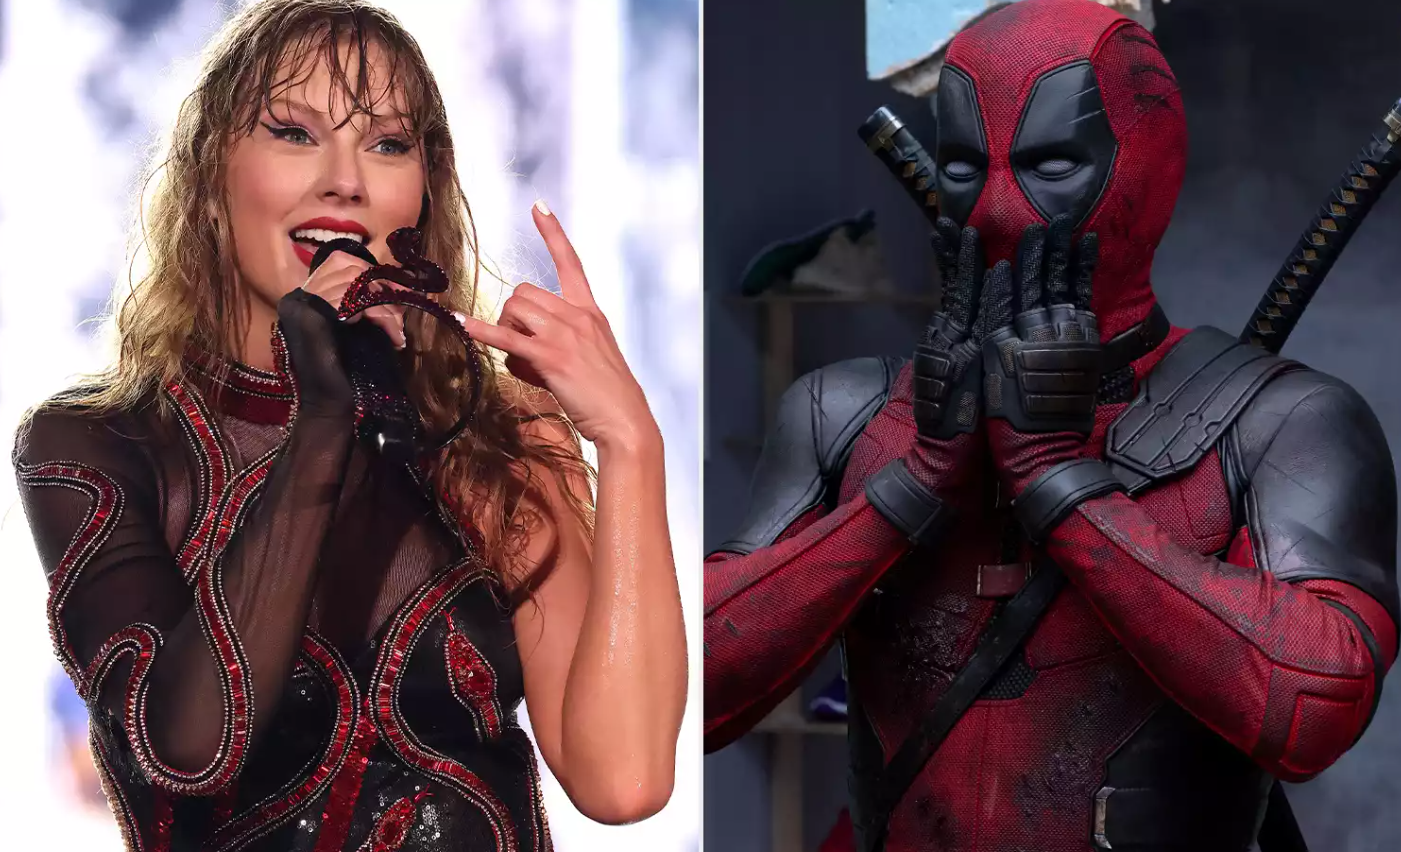 Sorry, Swifties: Taylor Swift is not featured in Deadpool and Wolverine (exclusive)